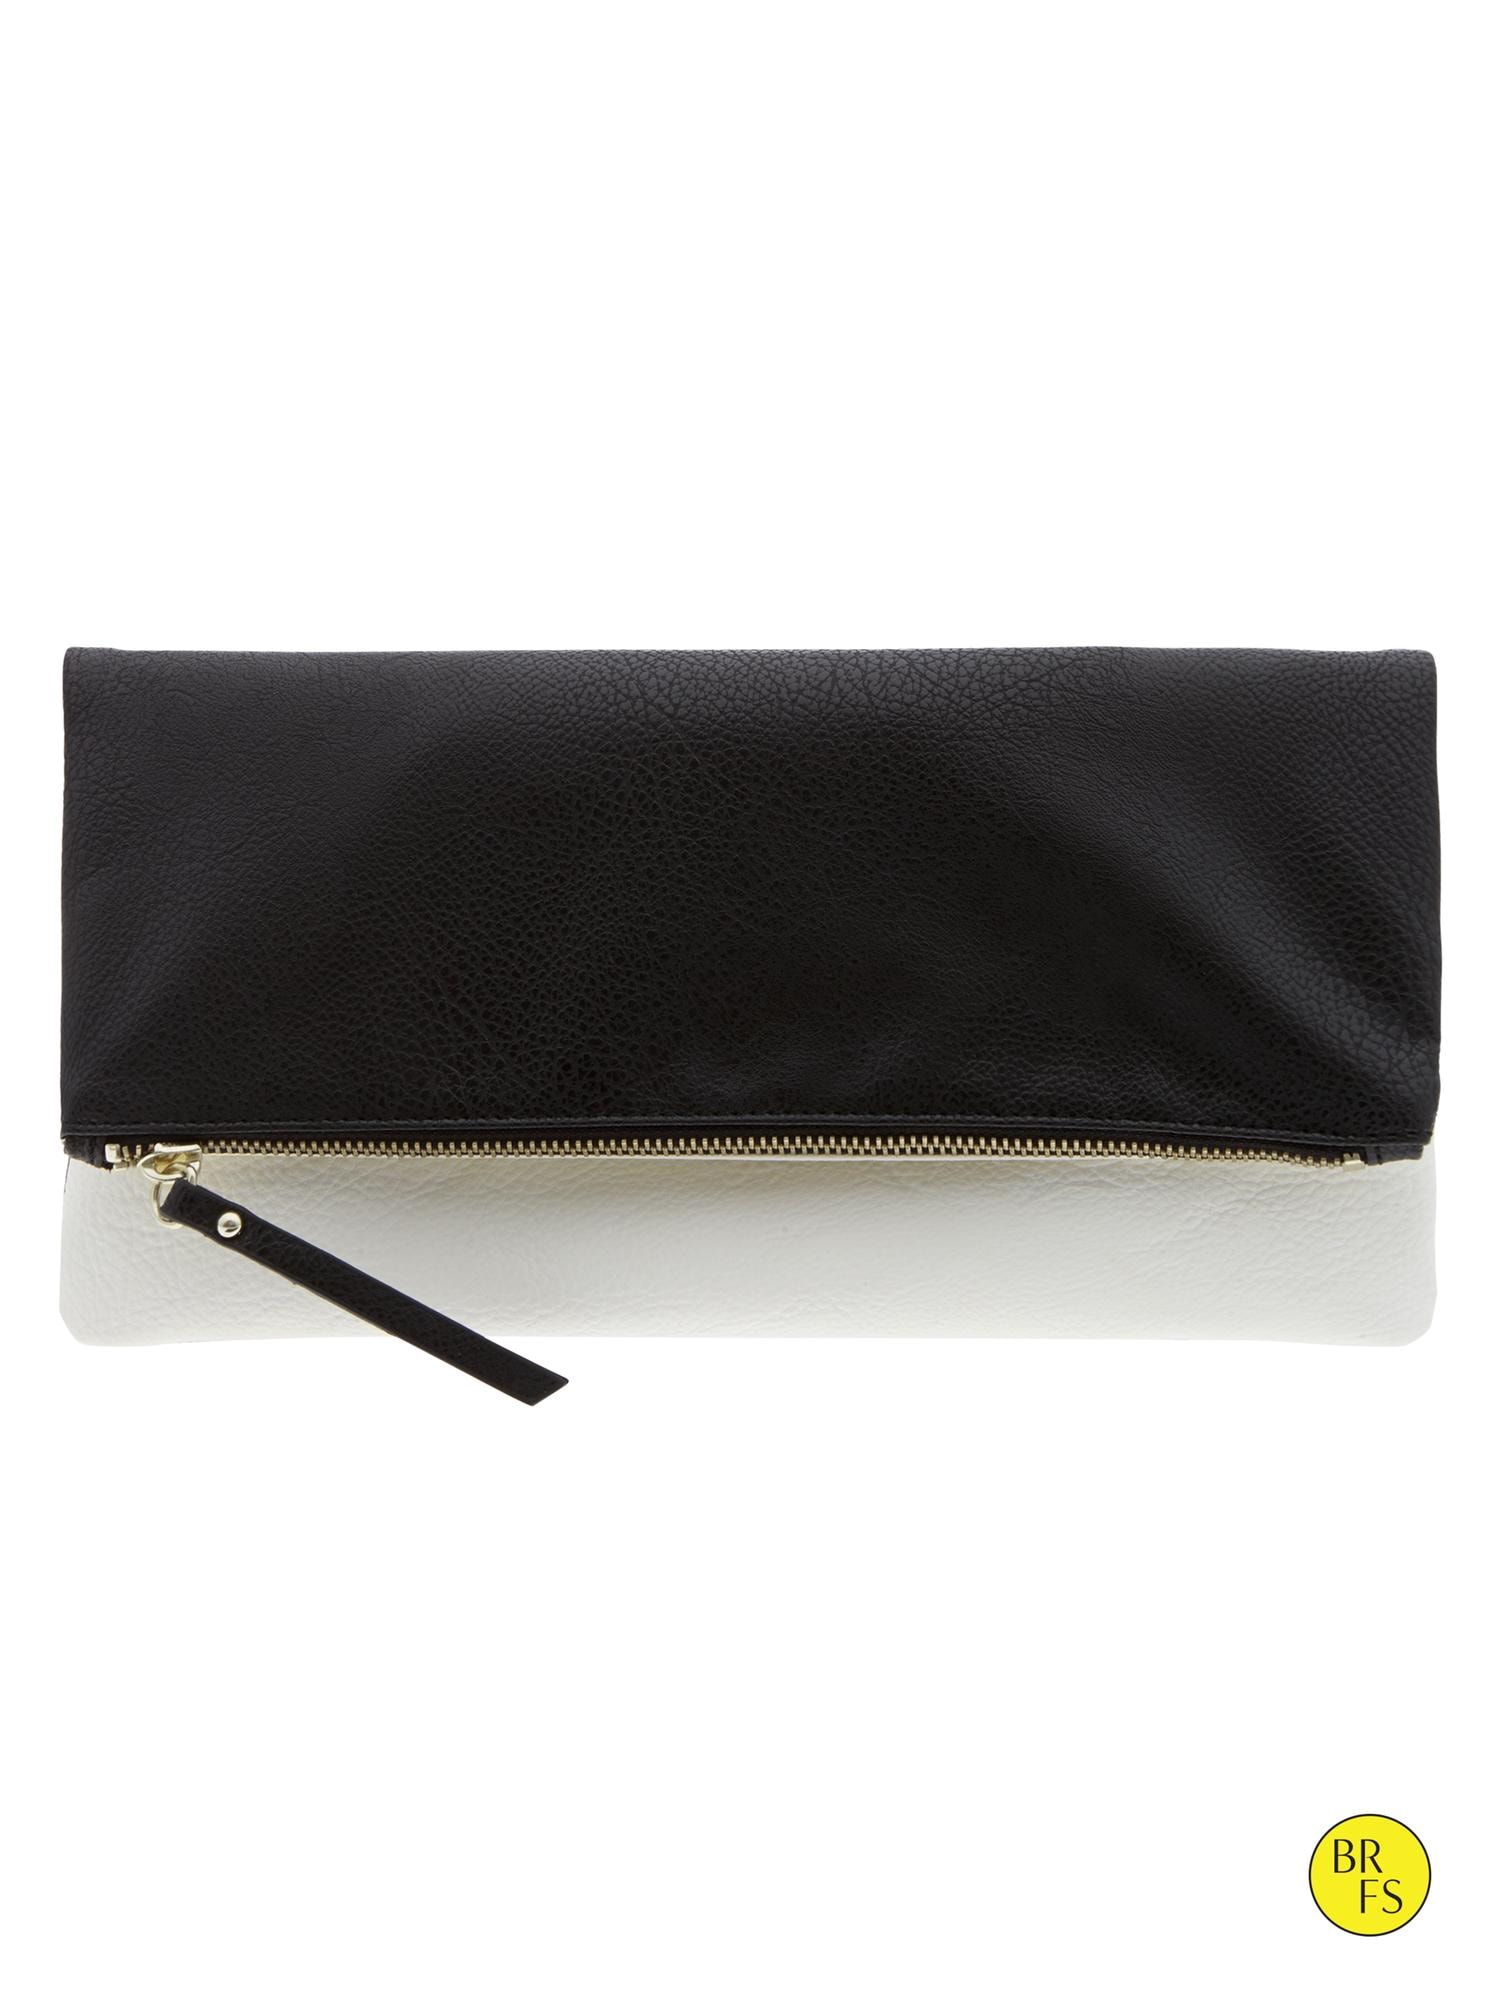 Factory Chelsea Foldover Clutch